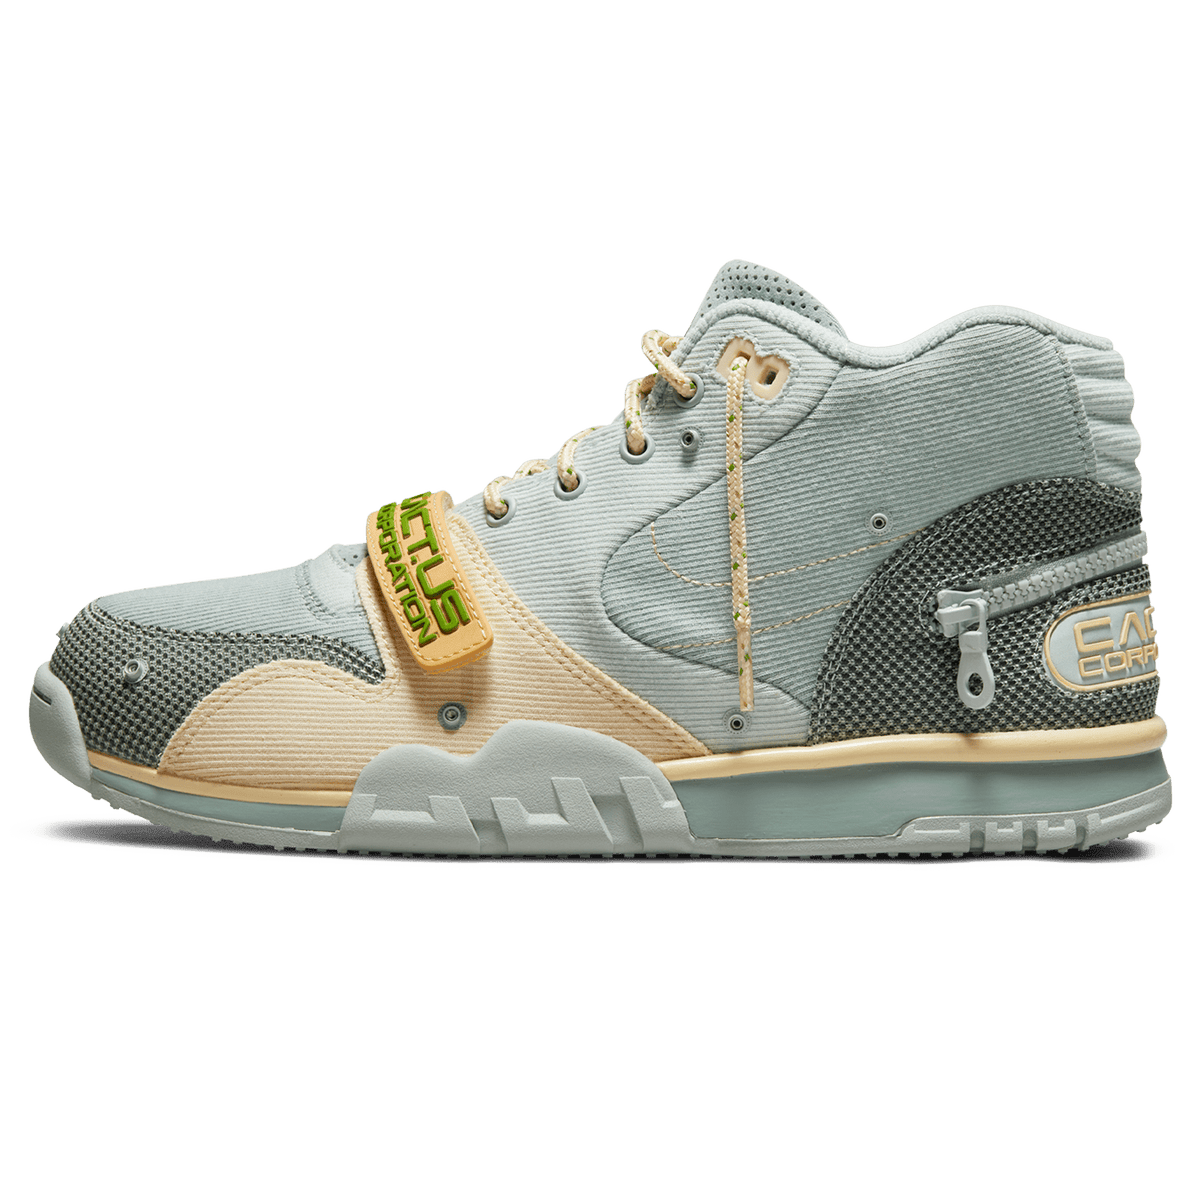 nike Trainers x cactus jack air trainer 1 dr7515 001 1